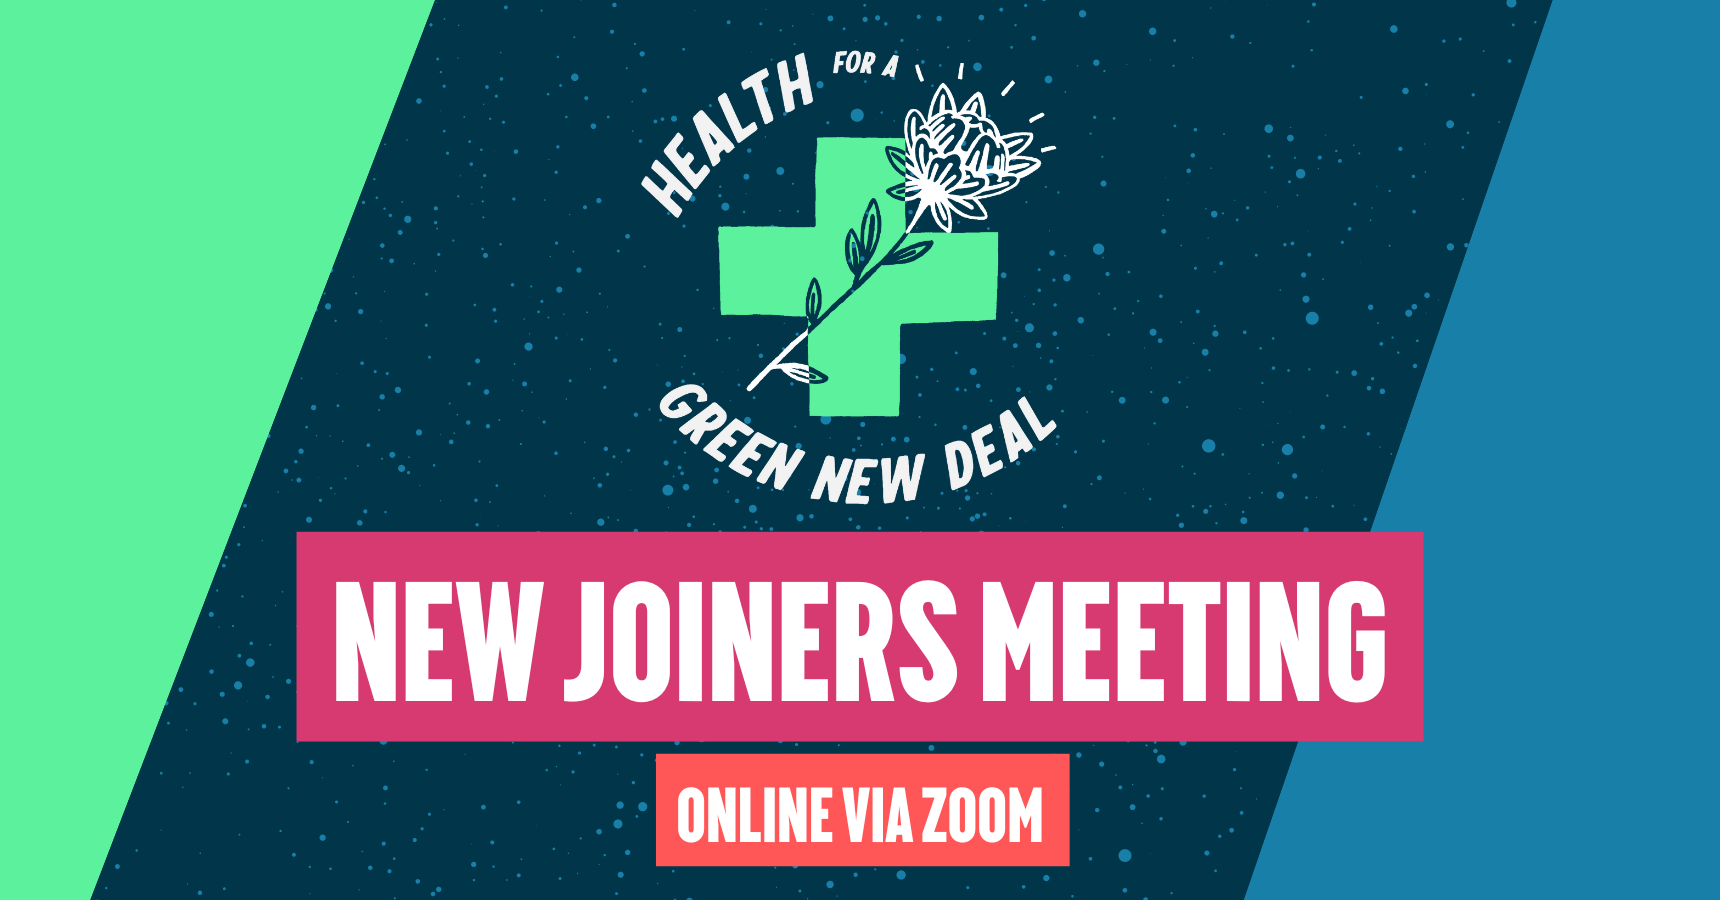 Health for a Green New Deal: New Joiners meeting